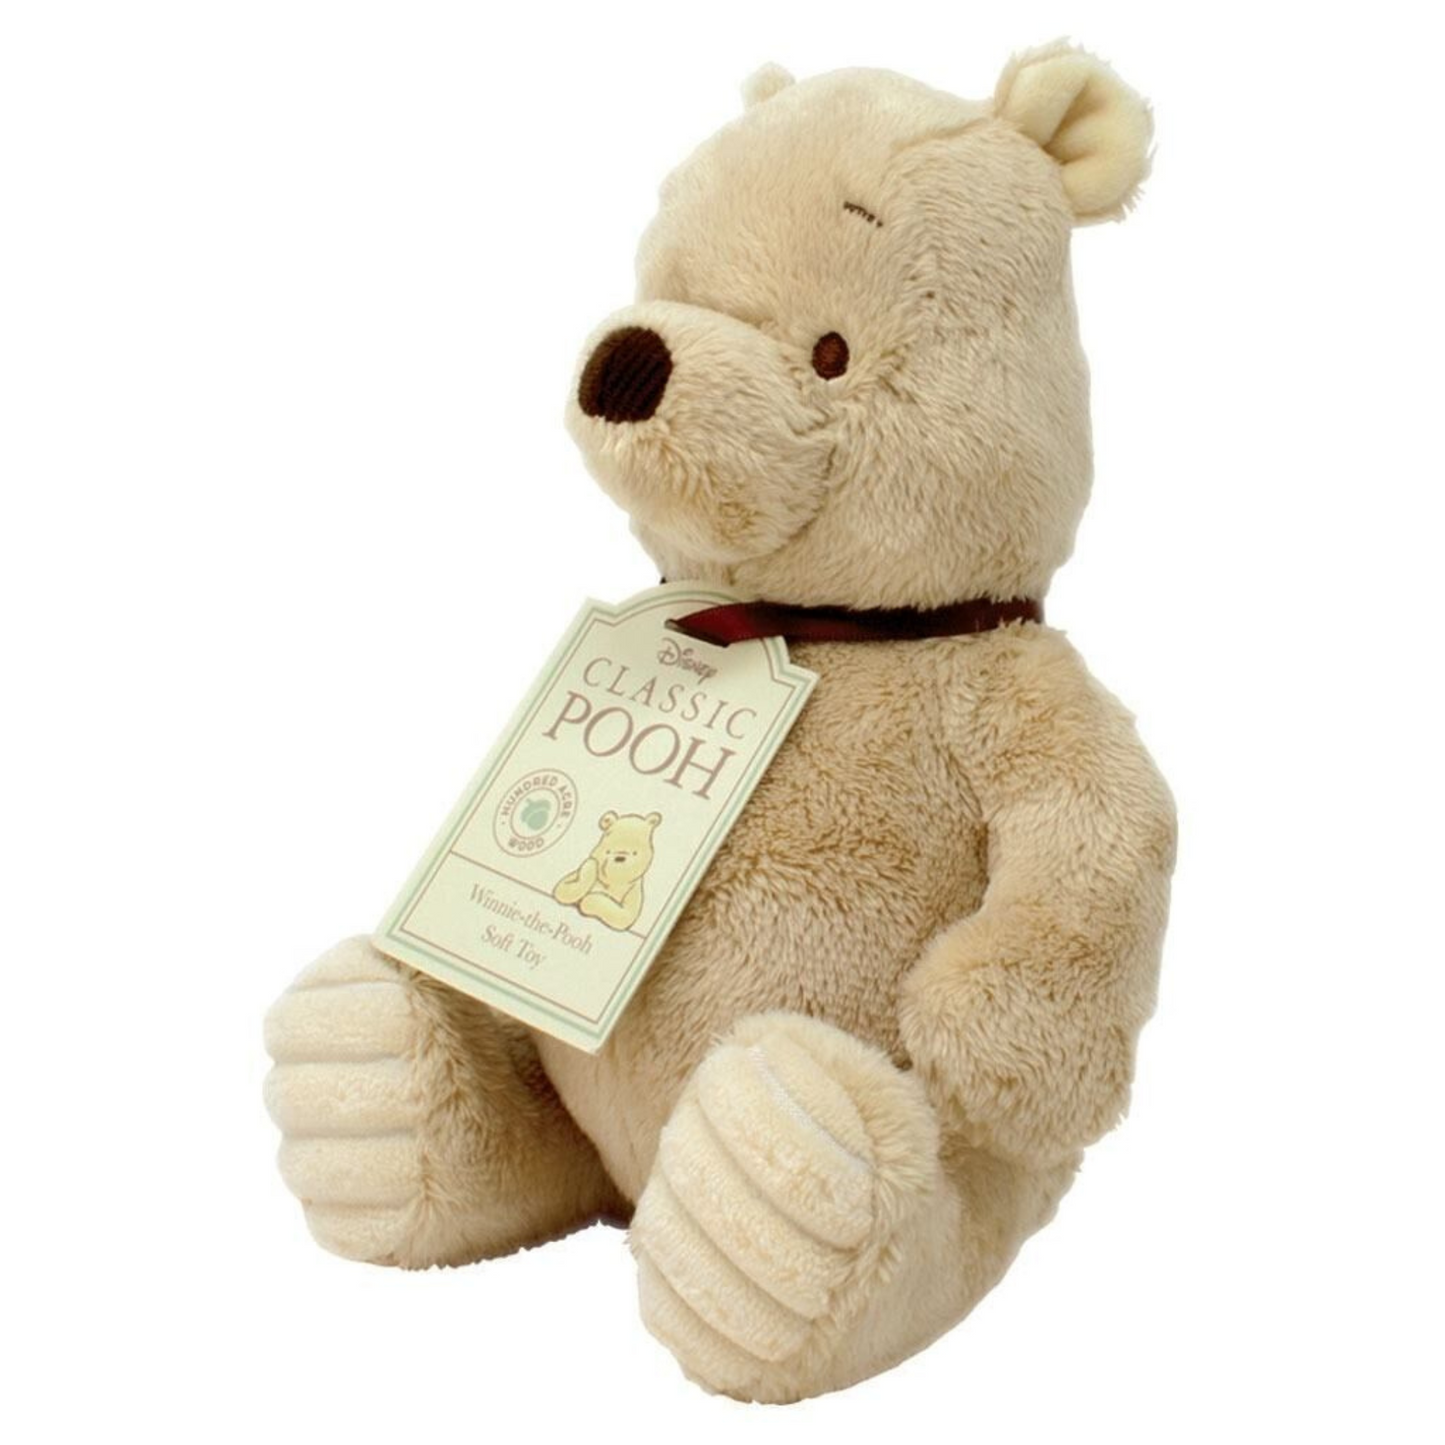 Winnie The Pooh Soft Toy - Hundred Acre Wood